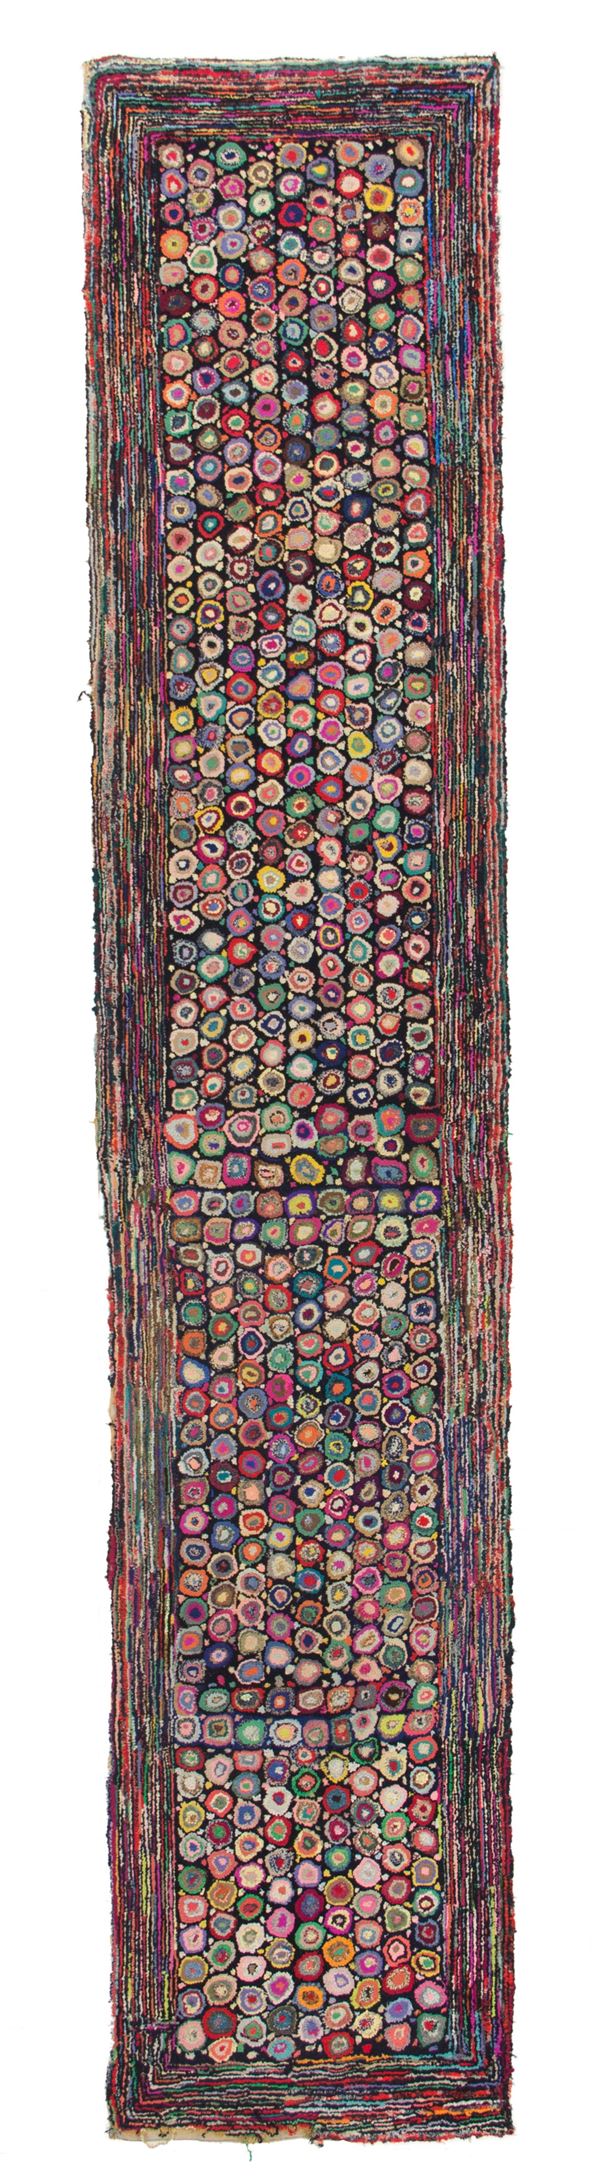 Hook rug in wool and various fabrics. United States